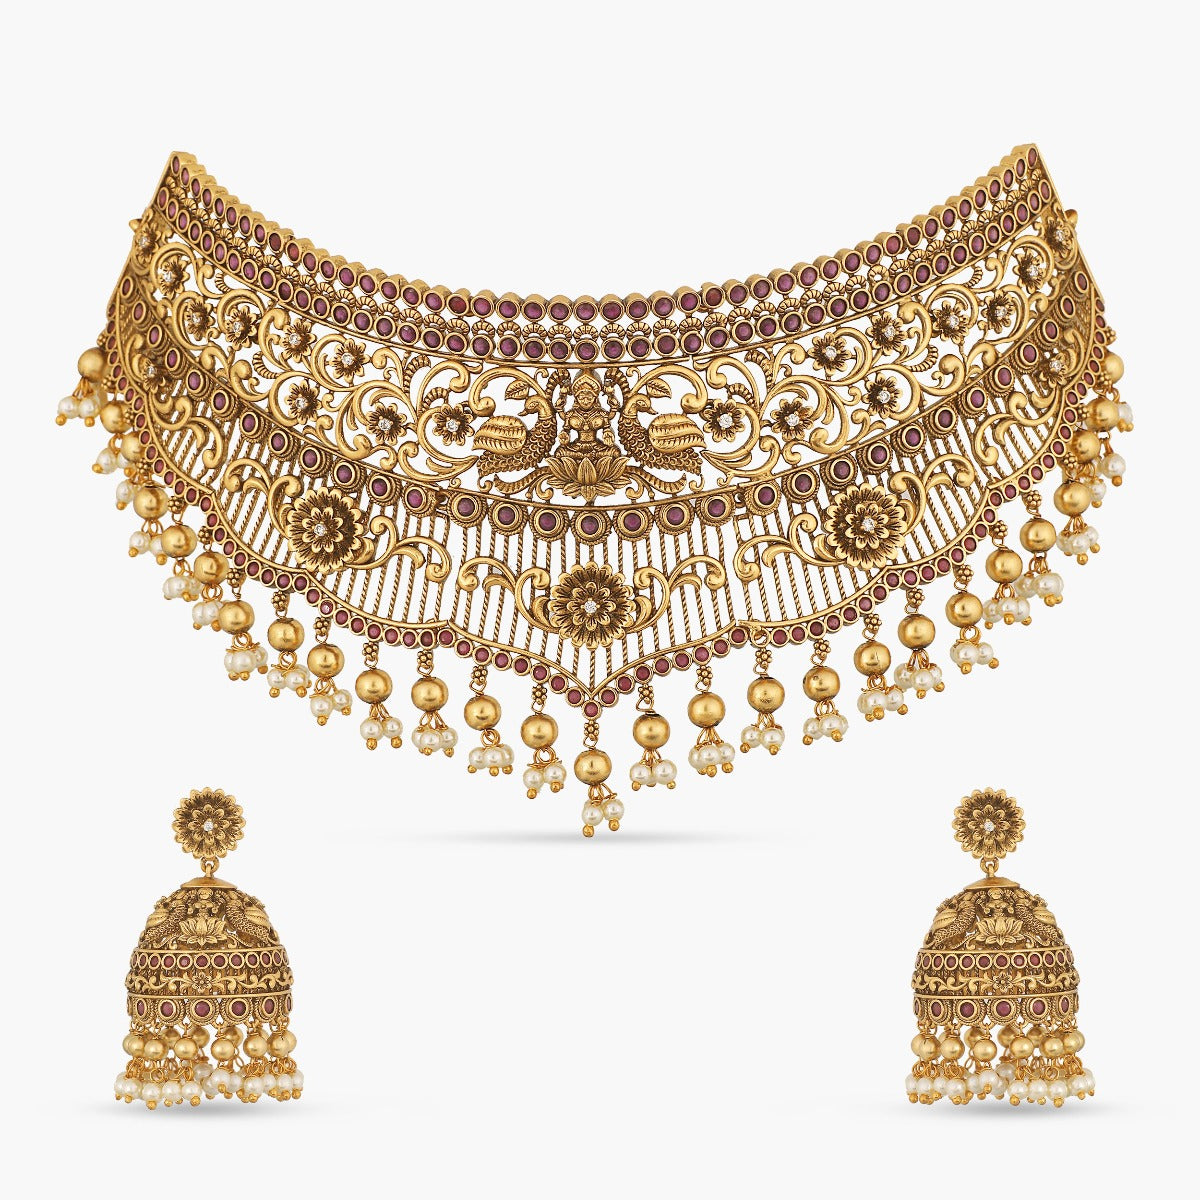 A picture of an Indian antique gold plated necklace set with a Lakshmi idol in the centre and matching earrings.